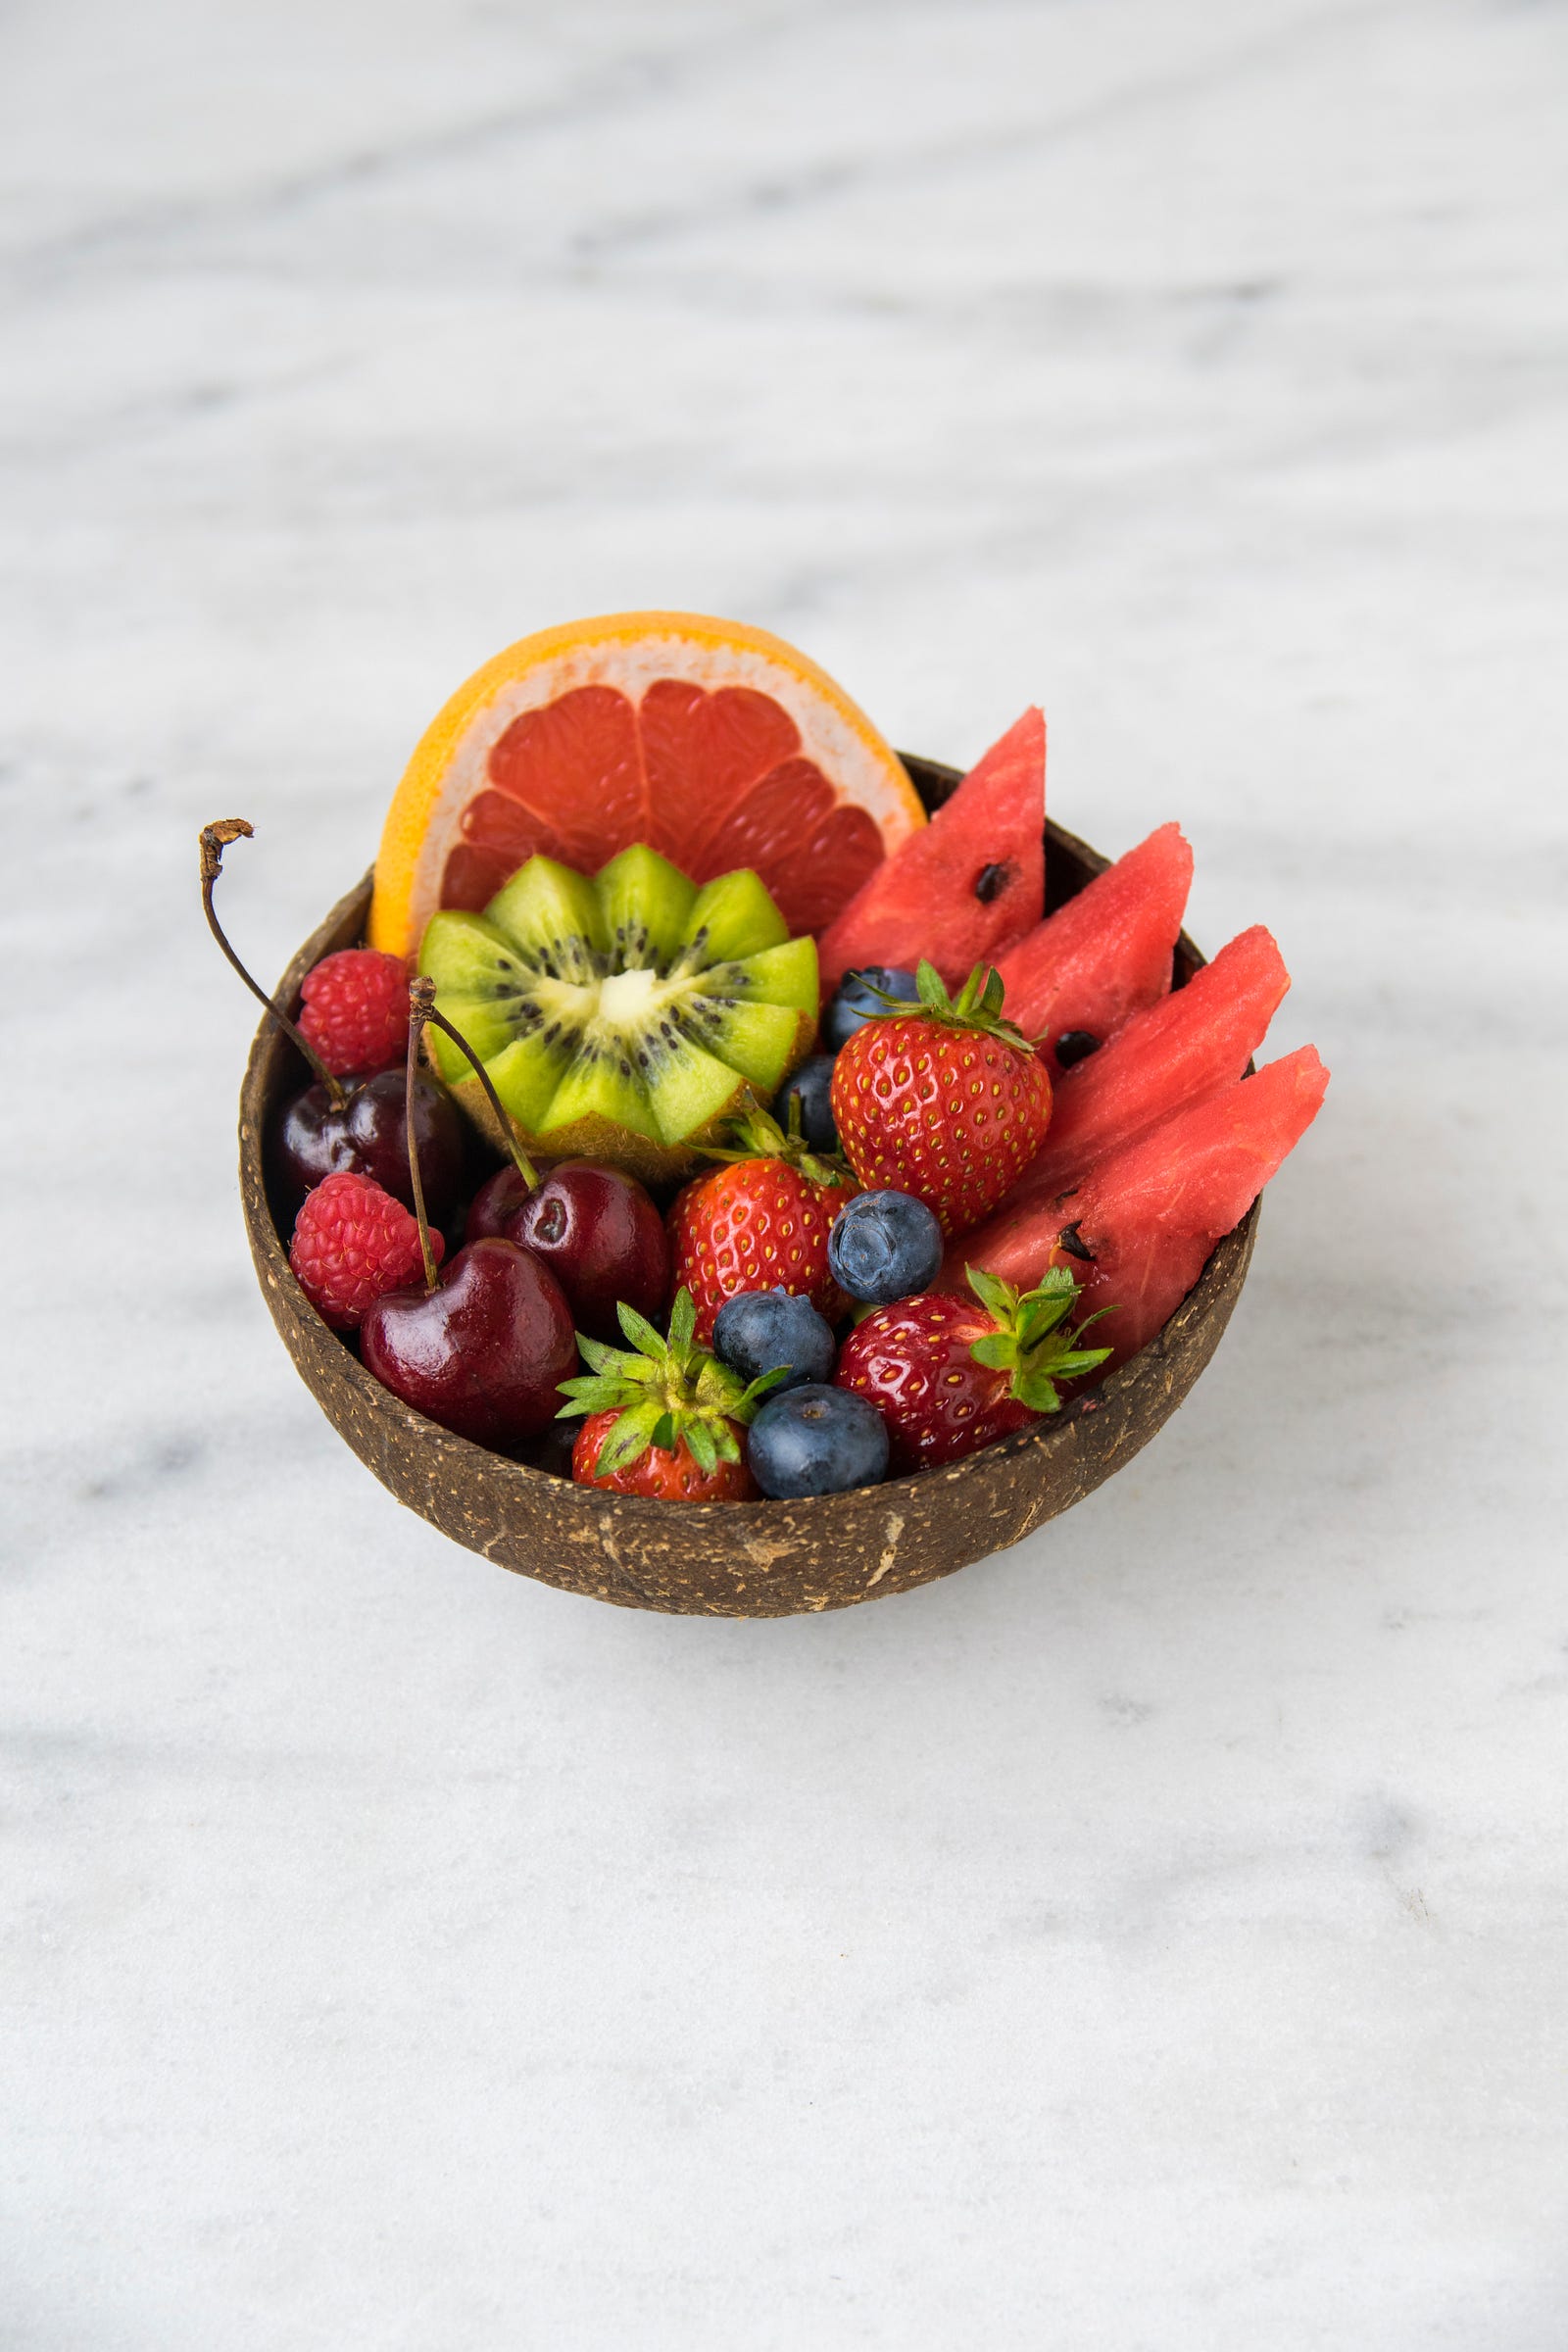 A wooden bowl of a wide variety of fruits, including strawberries, kiwifruit, honeydew, blueberries, and watermelon. Calorie counting often overlooks the nutritional value of food. By focusing on feeling full, dieters naturally gravitate towards more nutrient-dense options, such as fruits, vegetables, and whole grains. These choices provide essential vitamins, minerals, and fiber, supporting overall health and well-being beyond weight management.